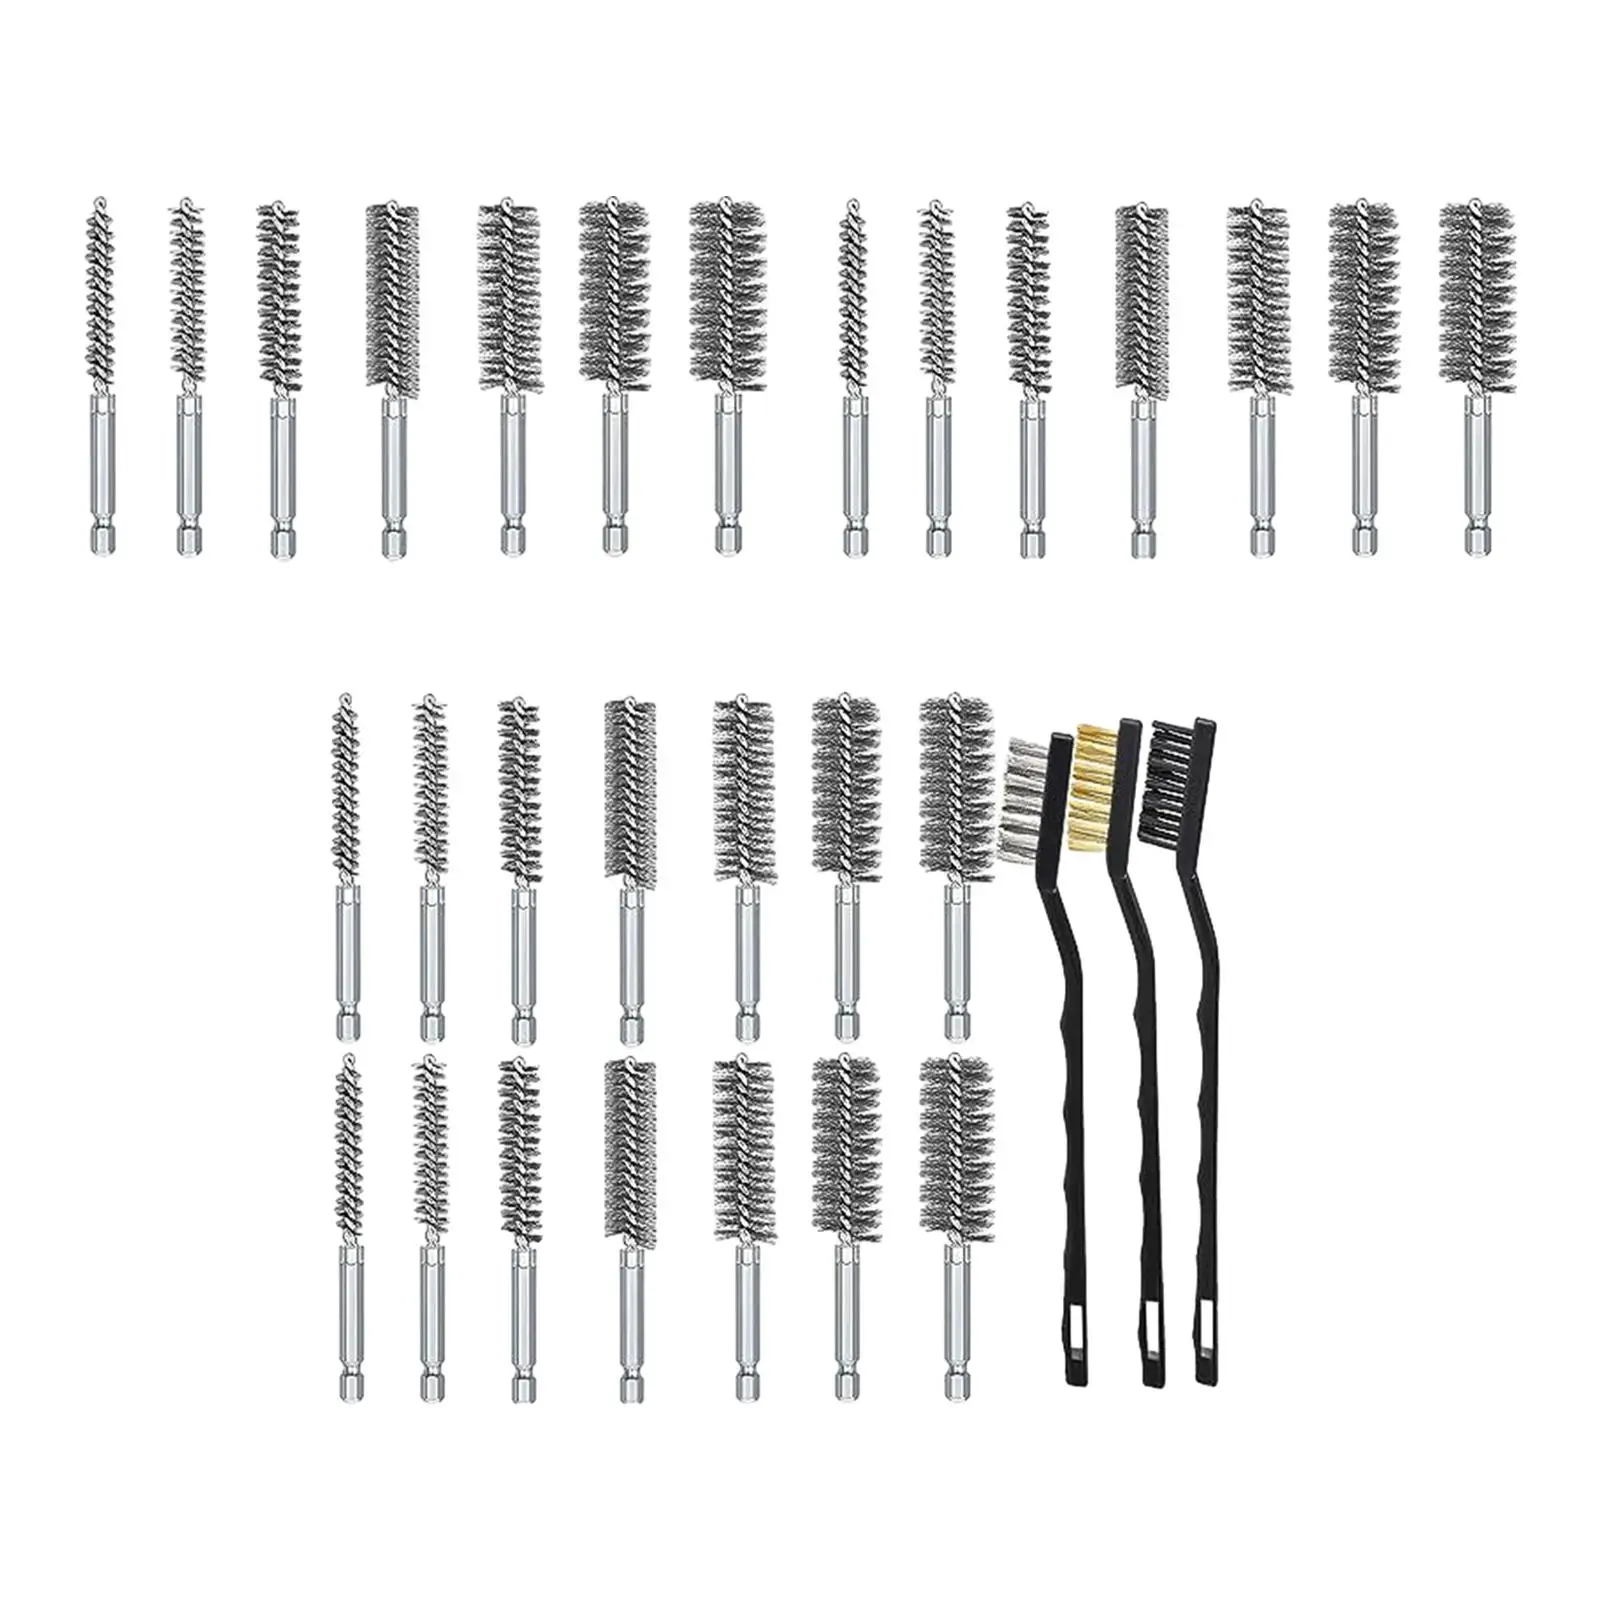 Bore Brush Set Accessories Sturdy 8mm-25mm with Handle Bore Cleaning Brushes